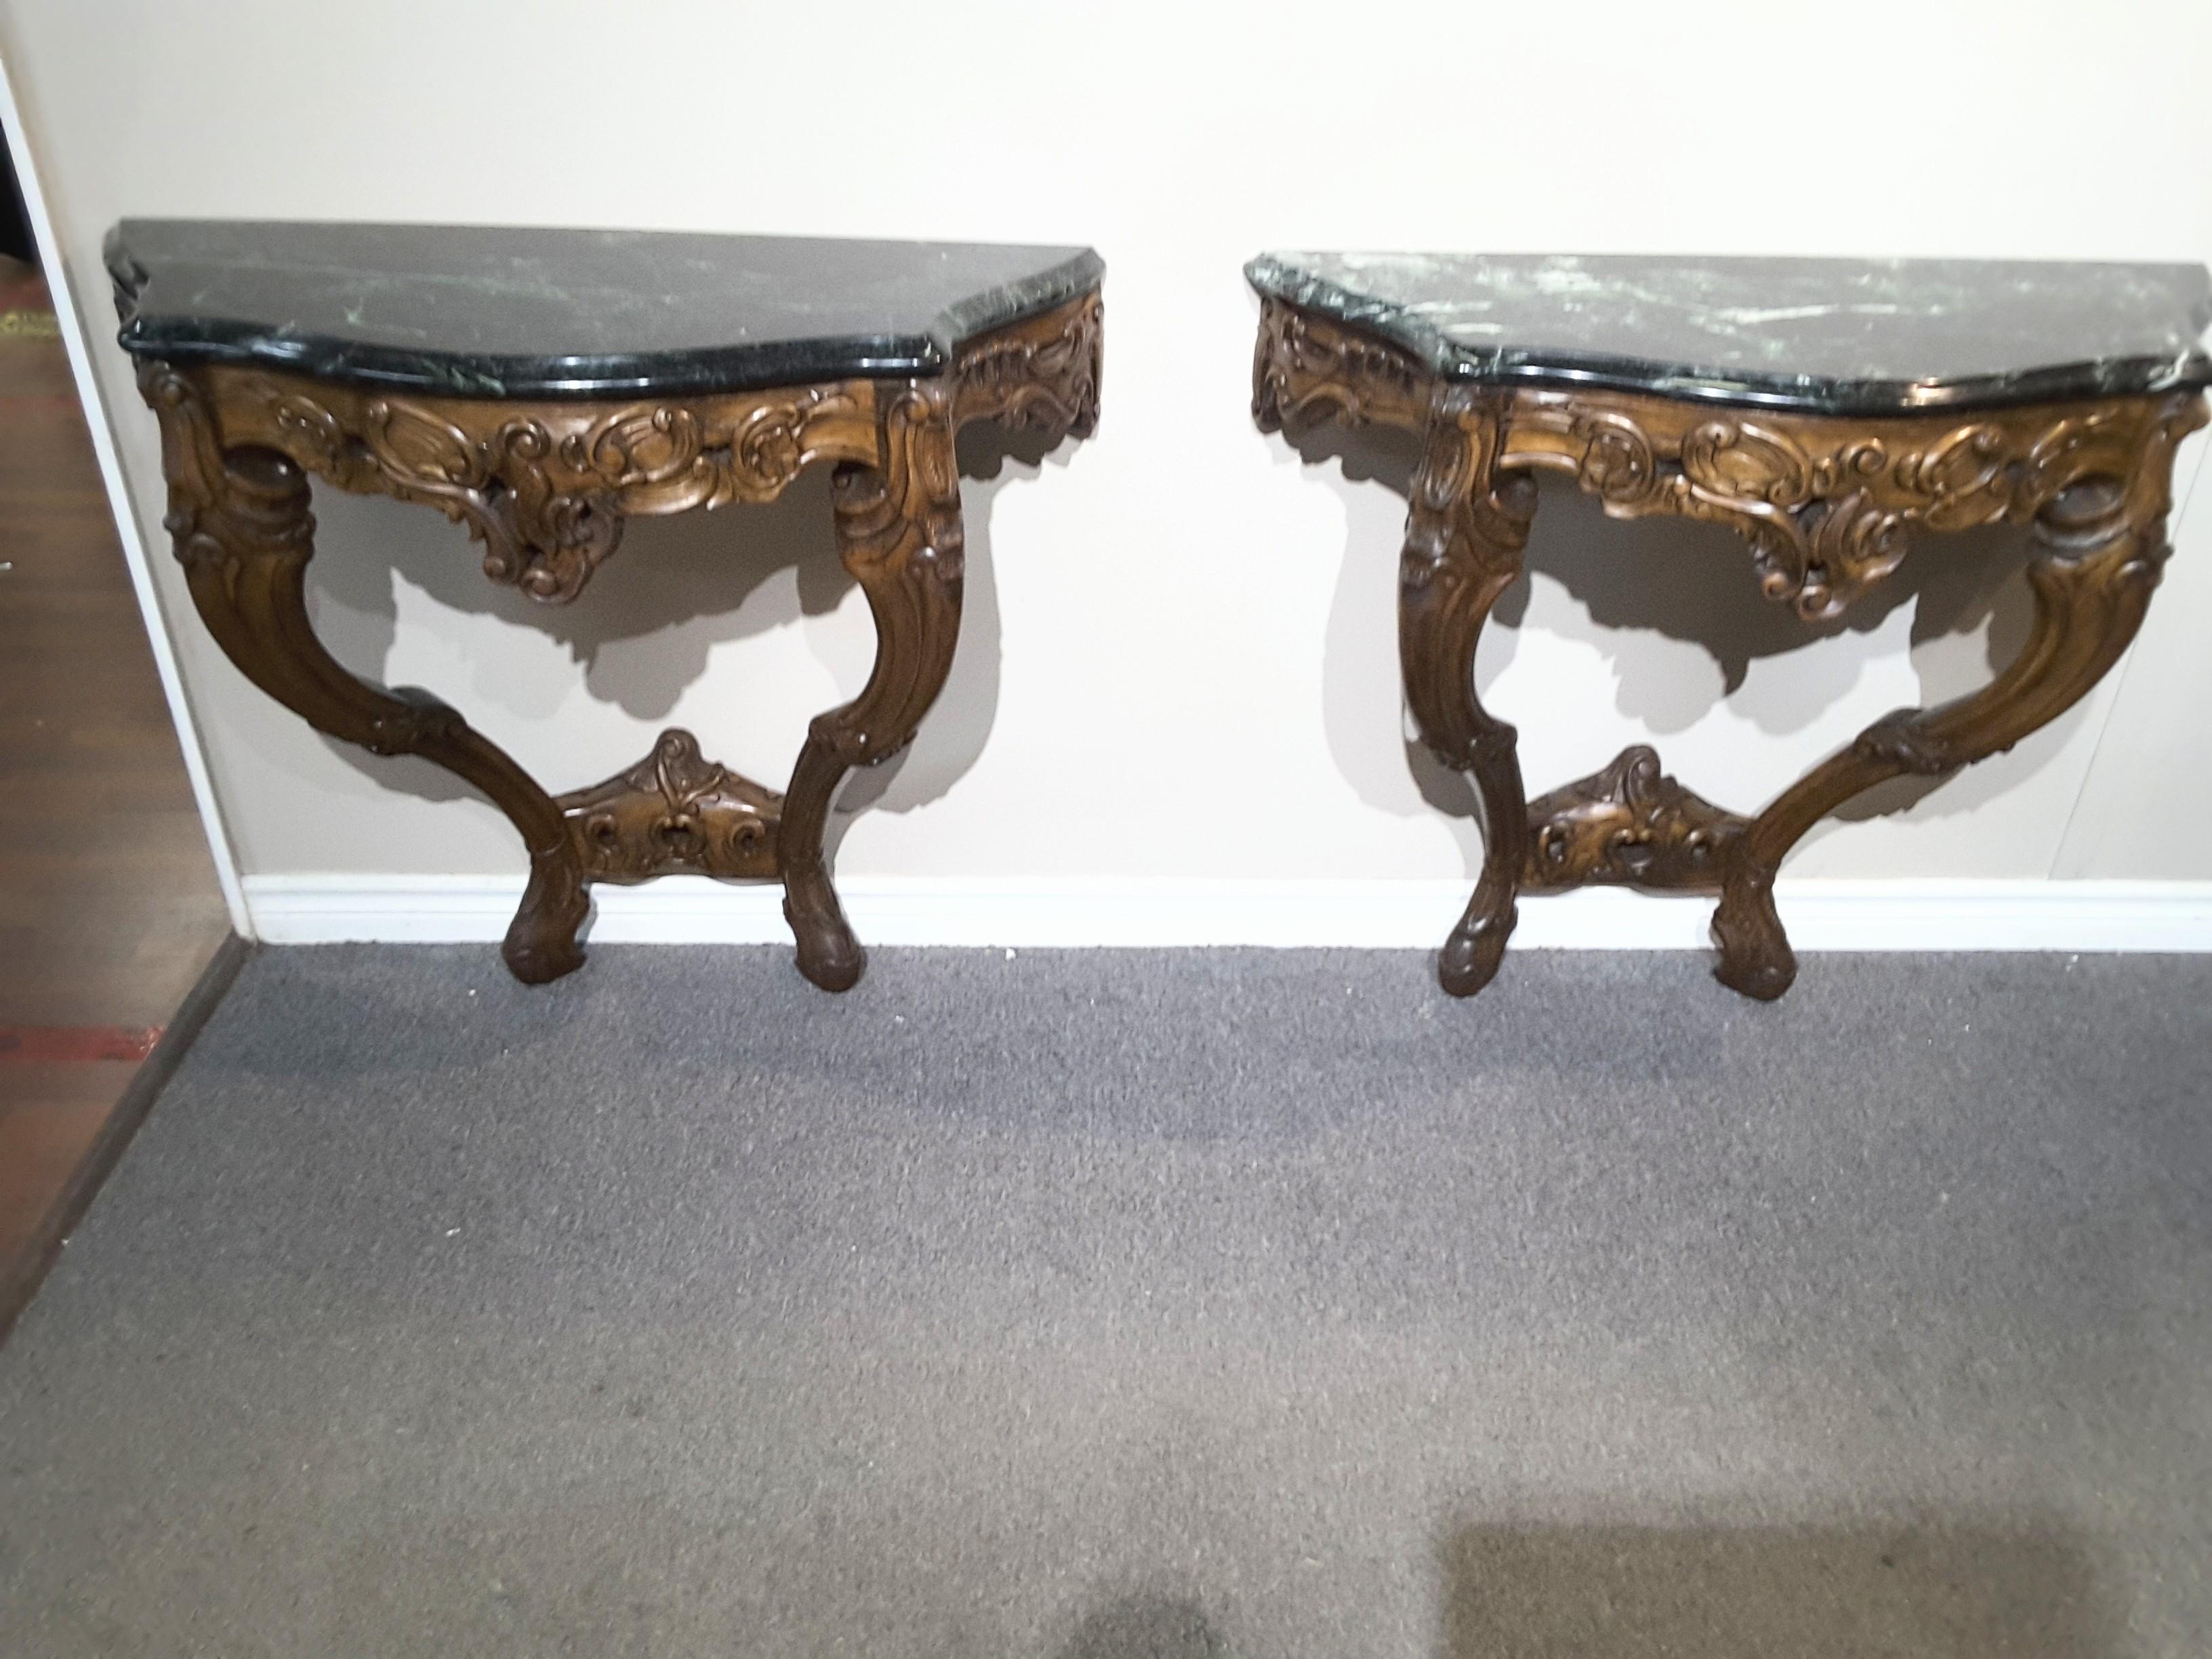 A pair of Louis XV style fruitwood console tables with verde green marble top
19th century,

The Verde indio marble top on a foliate and c-scroll carved base with cabriole legs jointed by a conforming stretcher.

Measuring,
33 3/4